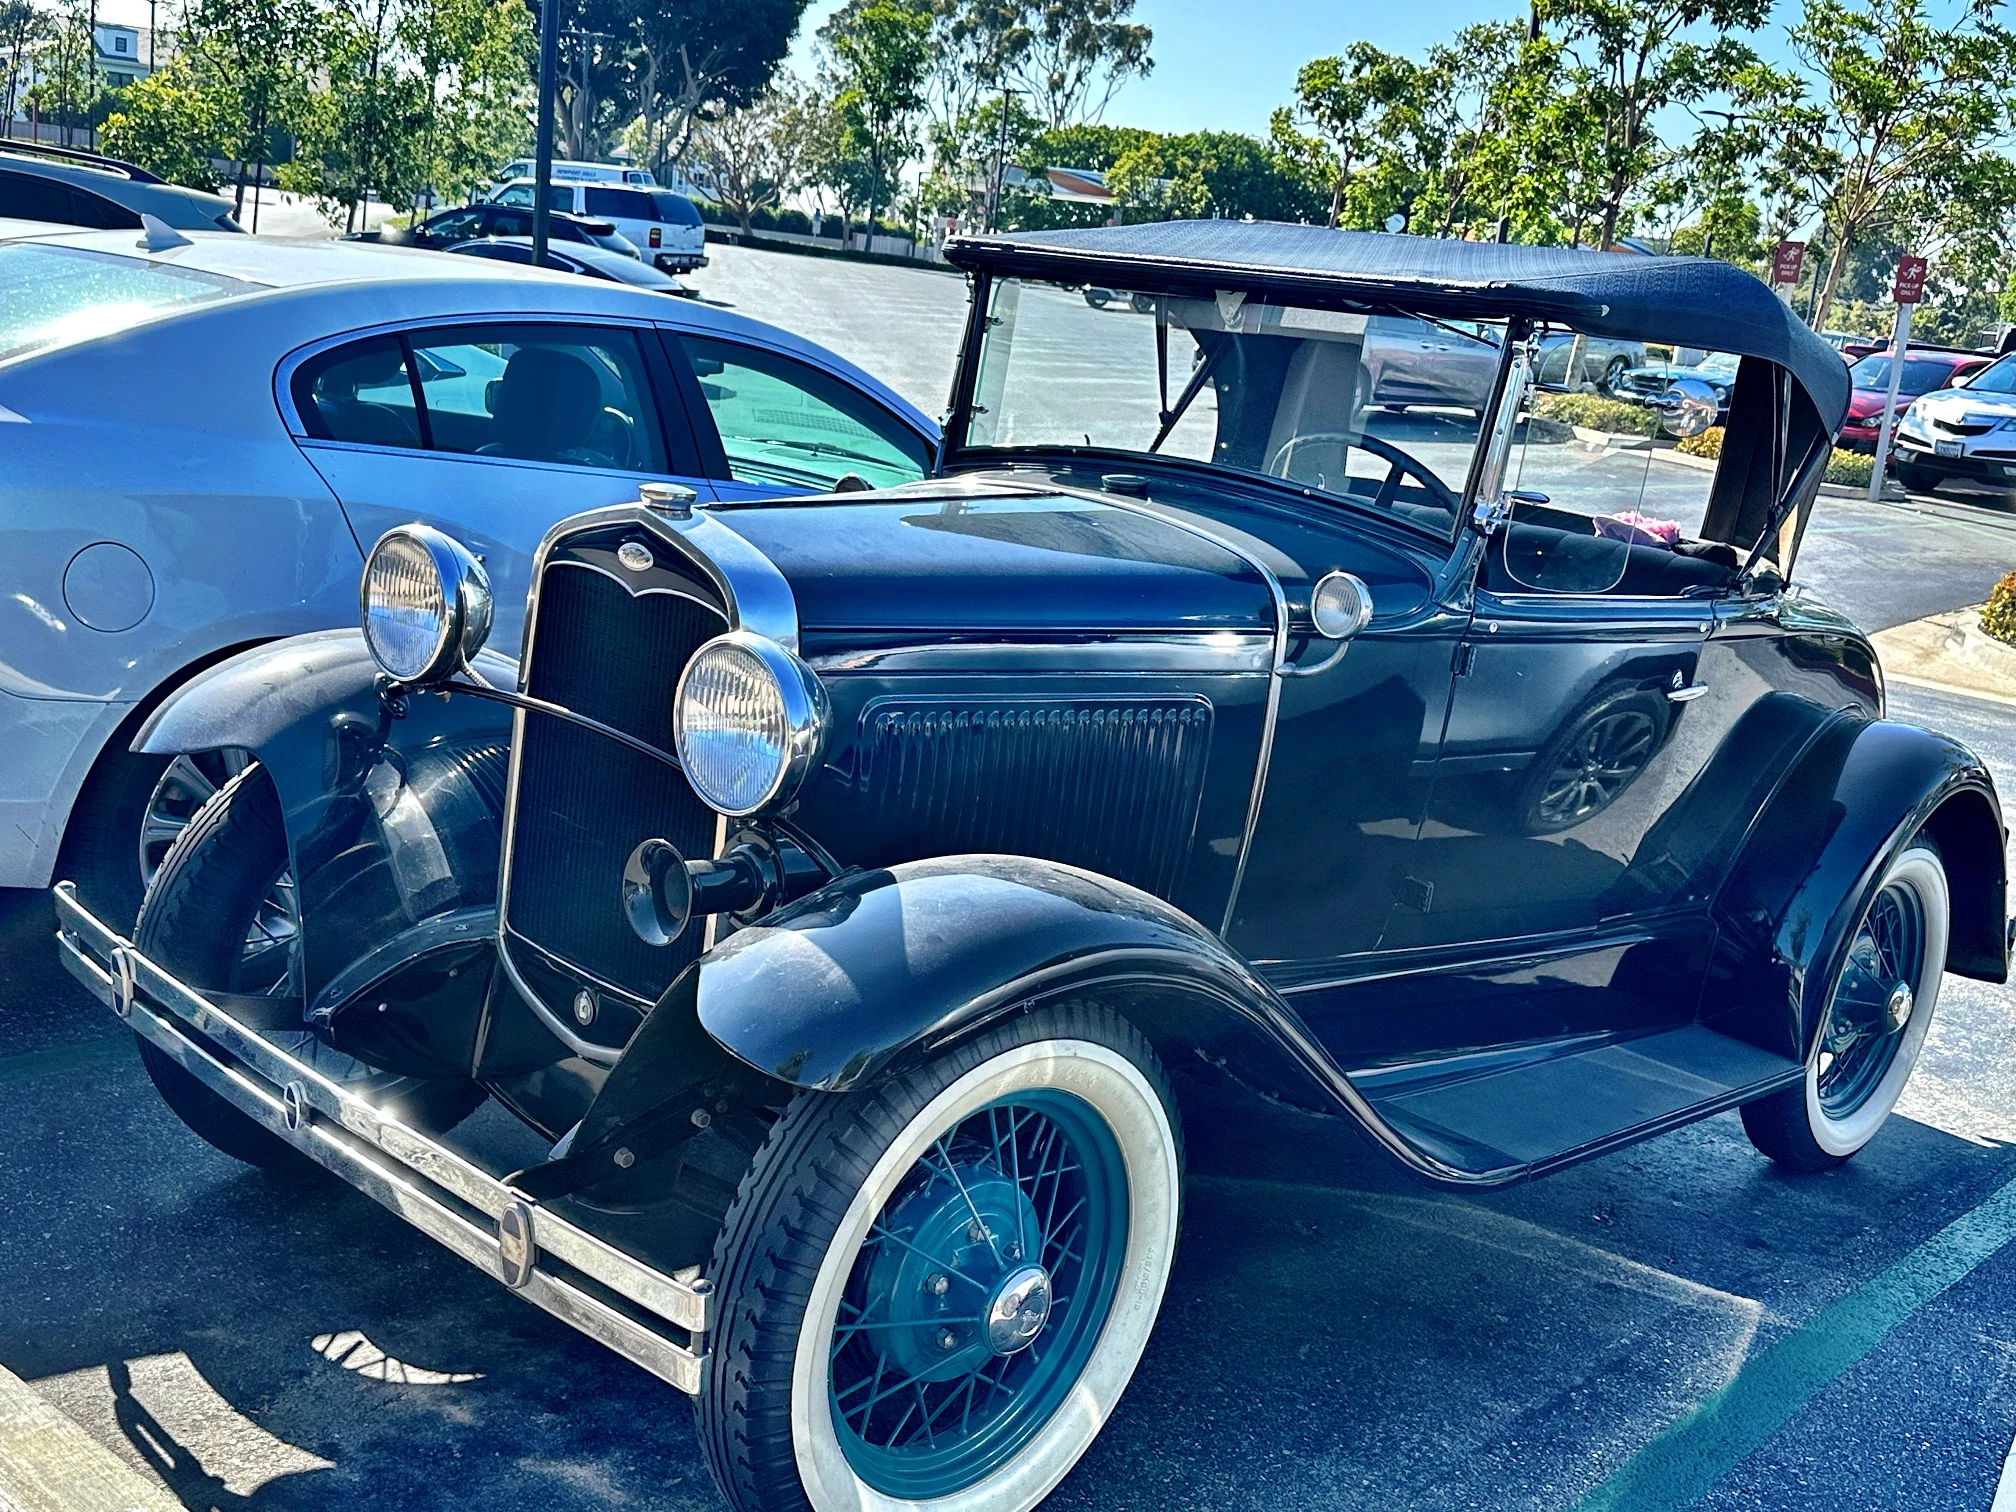 Always a good day when one of our senior clients can show off their classic car in Newport Beach.